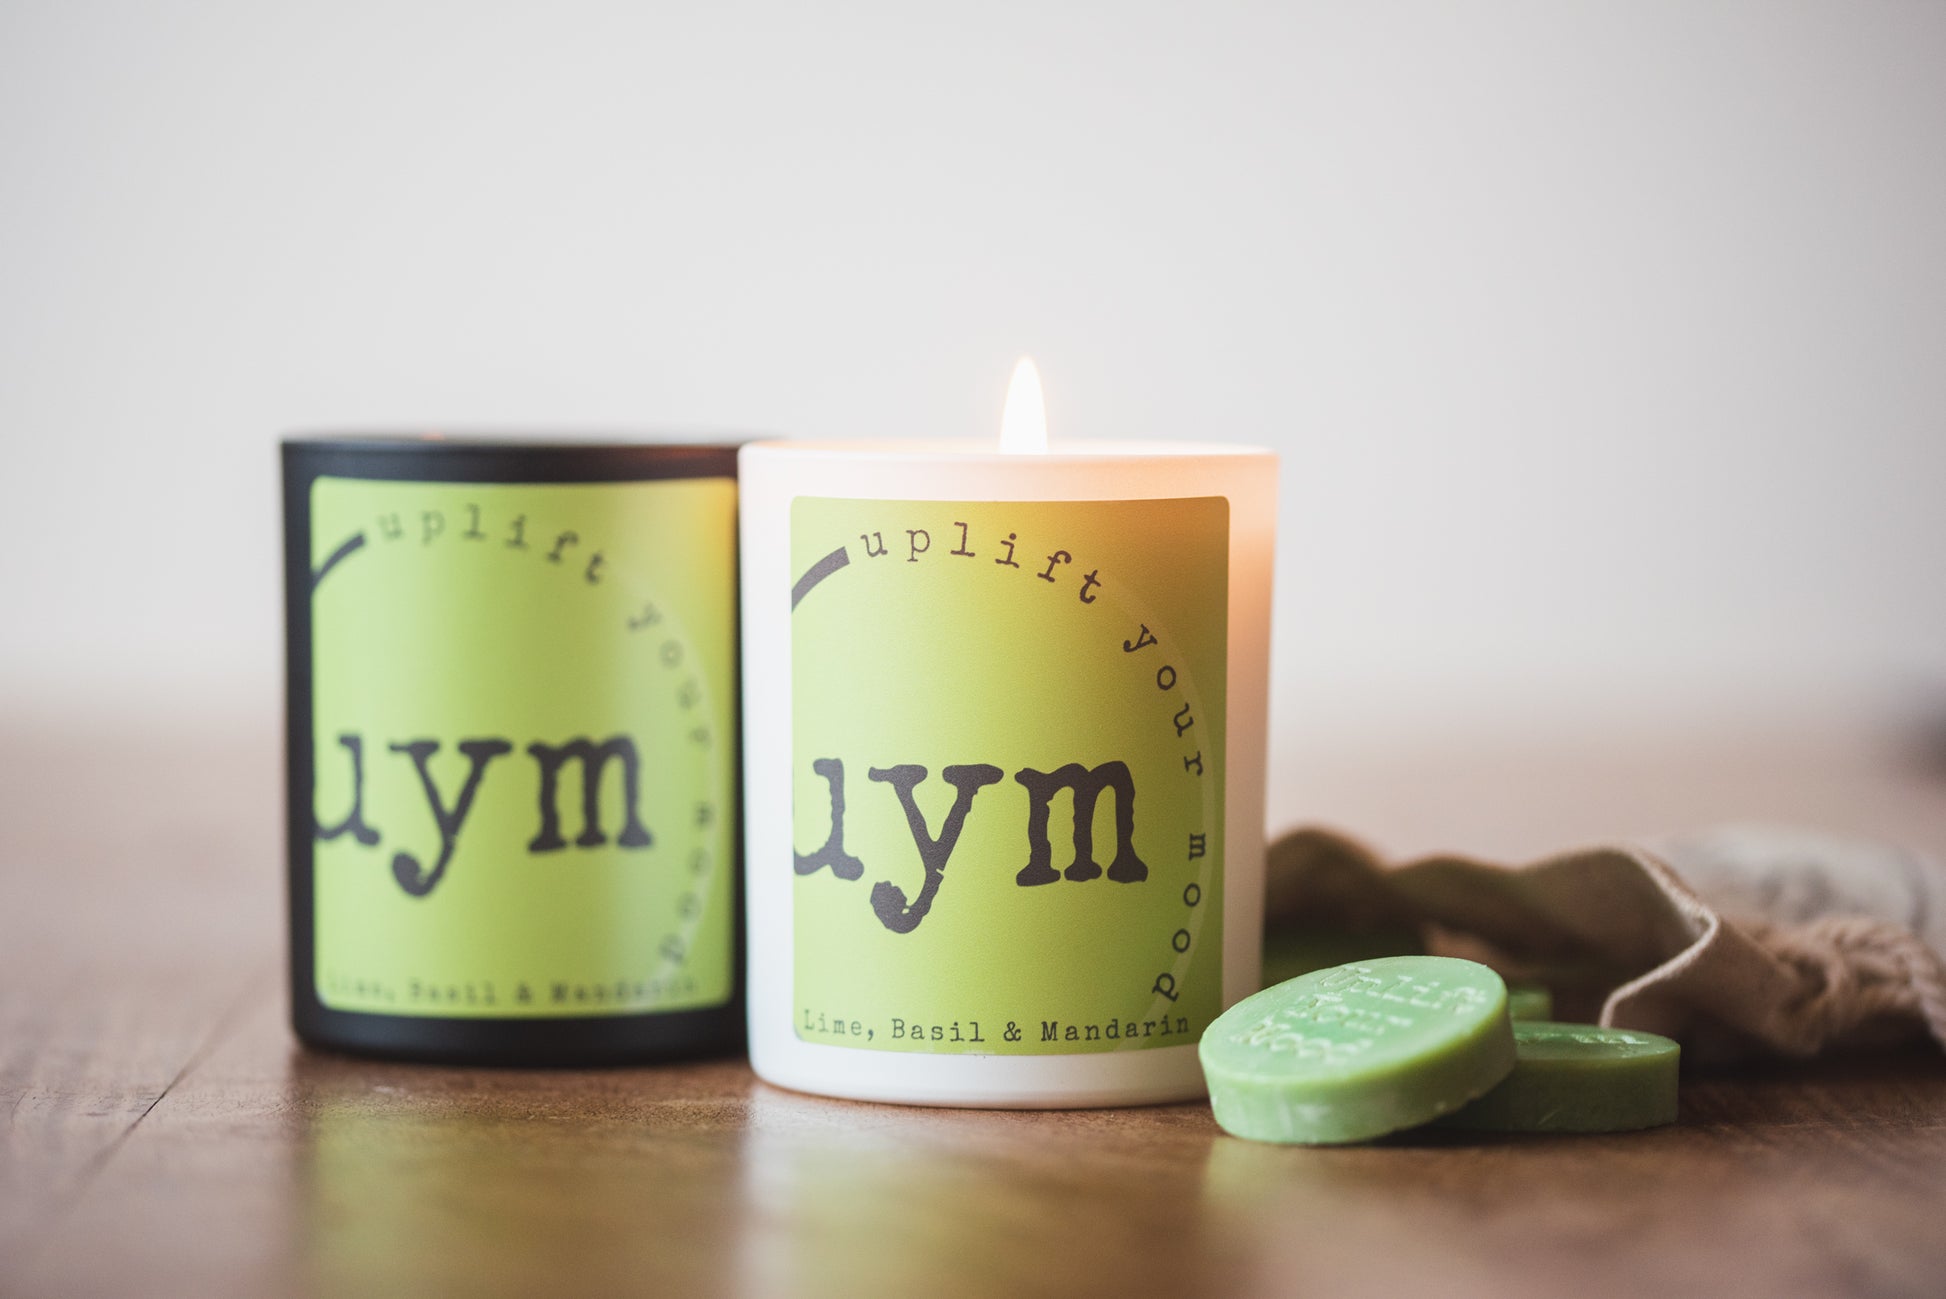 Lime, Basil & Mandarin Candle, natural wax candles, matt white and matt black glass jars, scented natural wax melts in cotton bags, Uplift Your Mood Scents